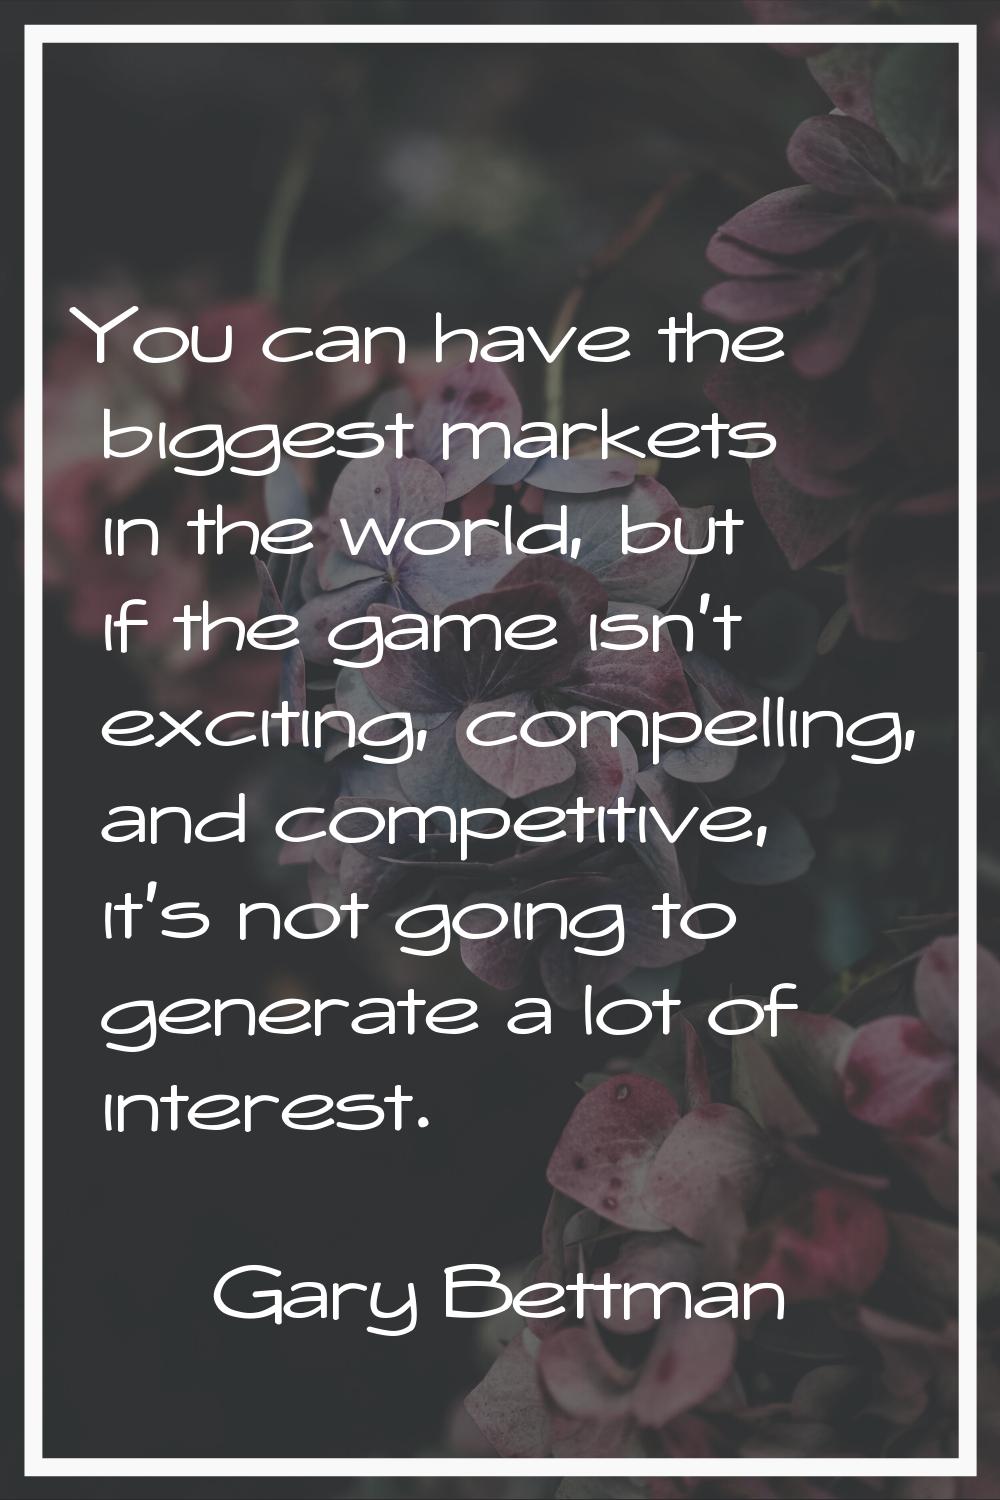 You can have the biggest markets in the world, but if the game isn't exciting, compelling, and comp